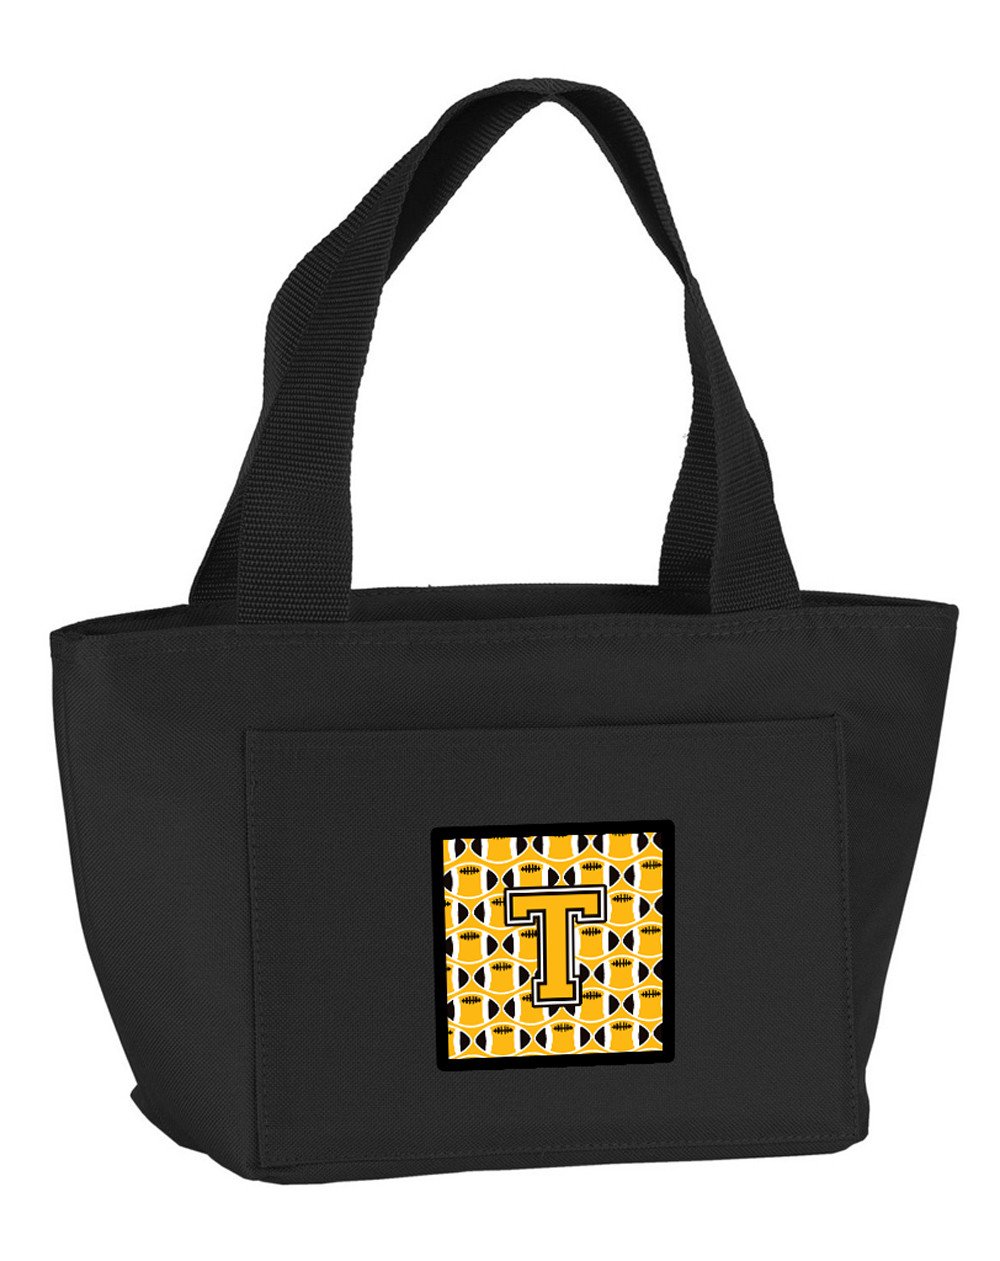 Letter T Football Black, Old Gold and White Lunch Bag CJ1080-TBK-8808 by Caroline's Treasures